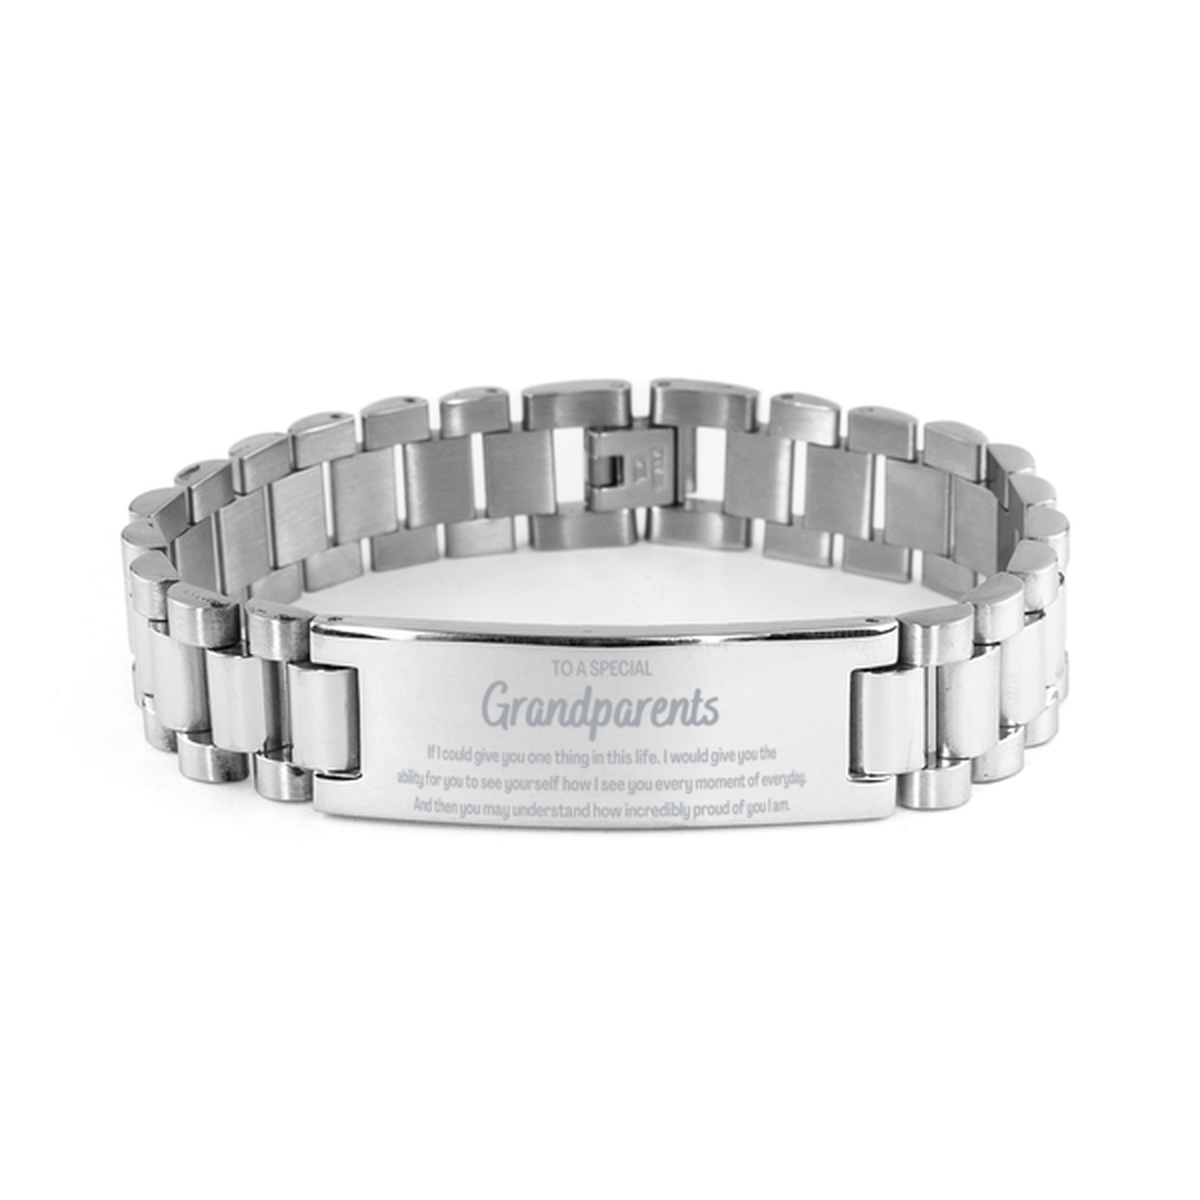 To My Grandparents Ladder Stainless Steel Bracelet, Gifts For Grandparents Engraved, Inspirational Gifts for Christmas Birthday, Epic Gifts for Grandparents To A Special Grandparents how incredibly proud of you I am